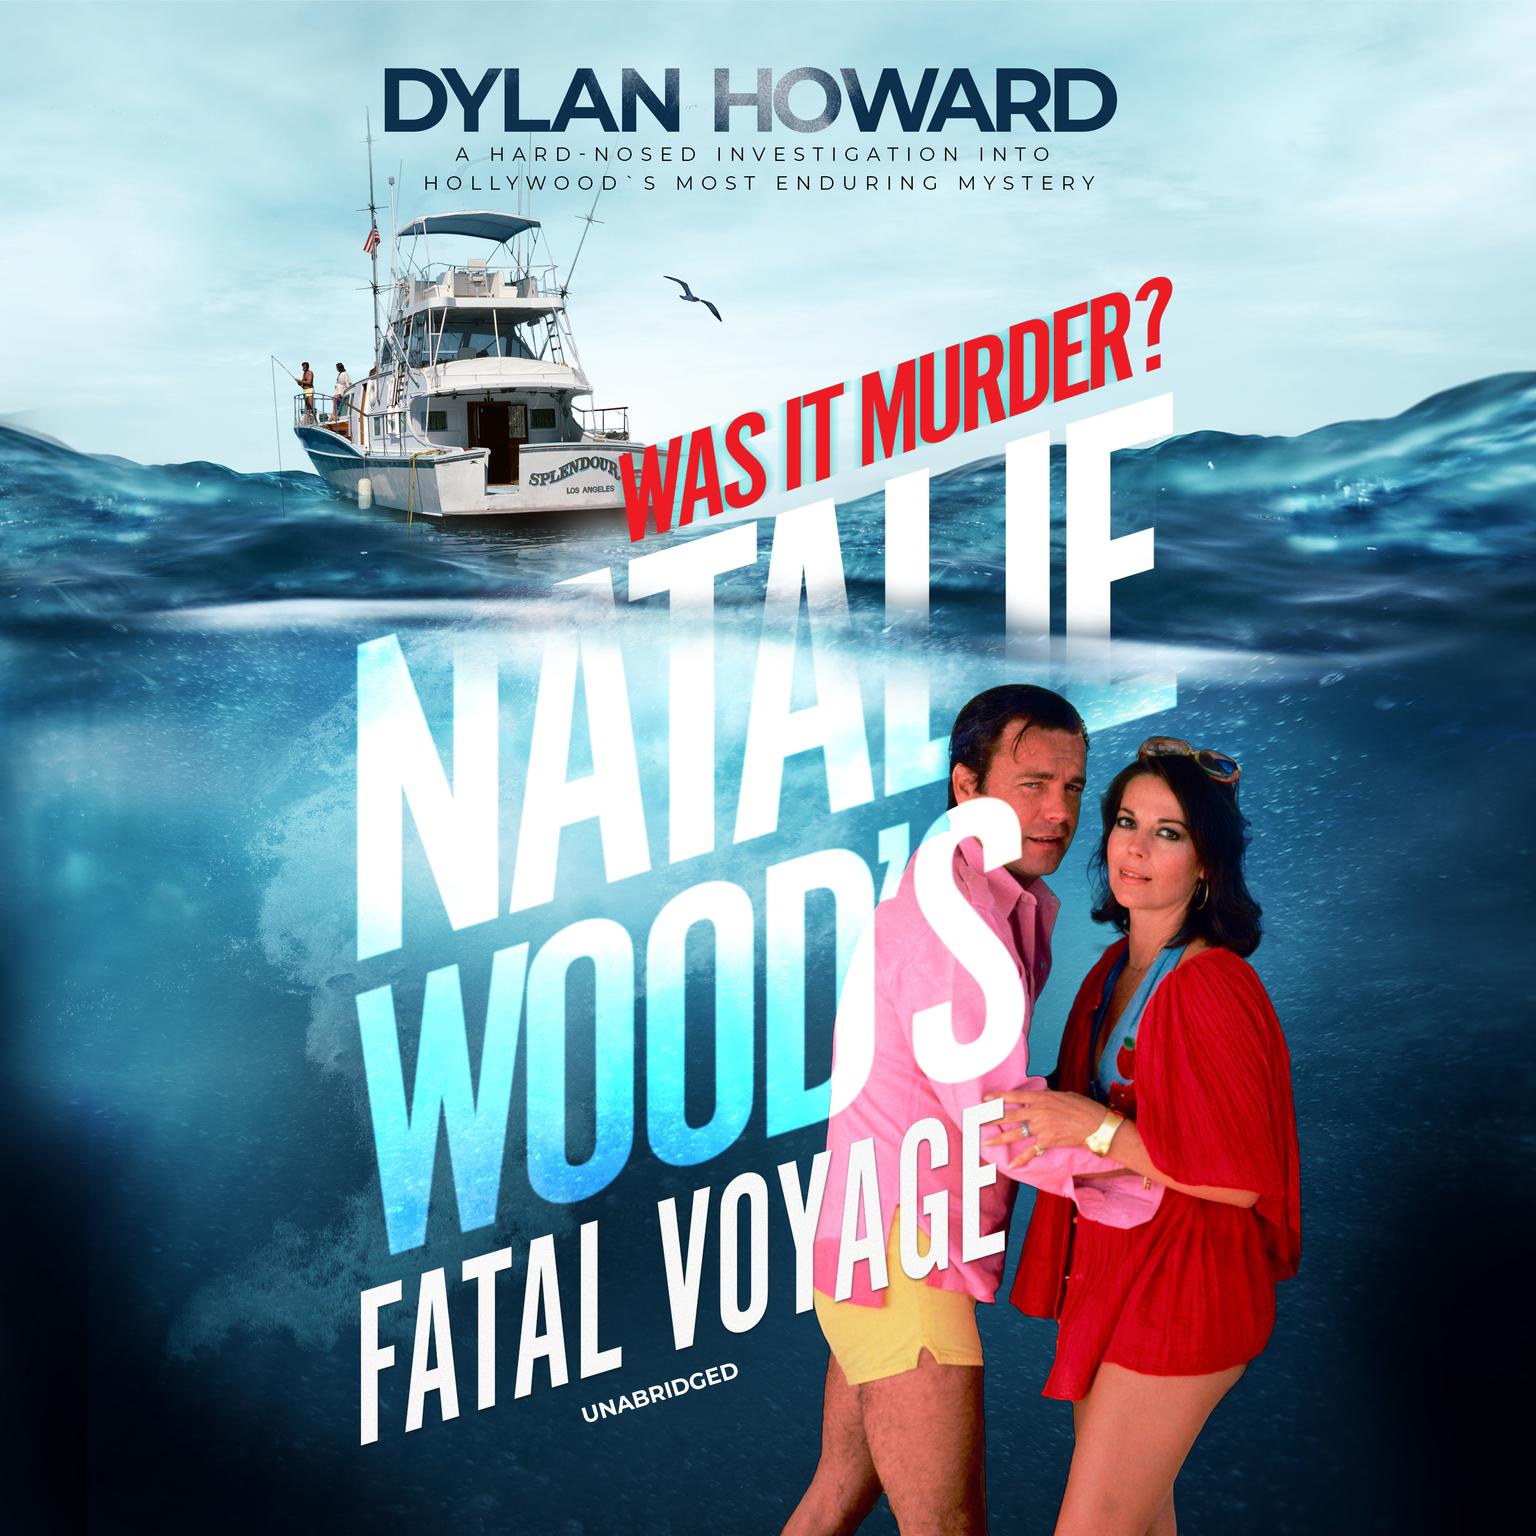  Fatal Voyage: The Mysterious Death of Natalie Wood Audiobook, by Dylan Howard